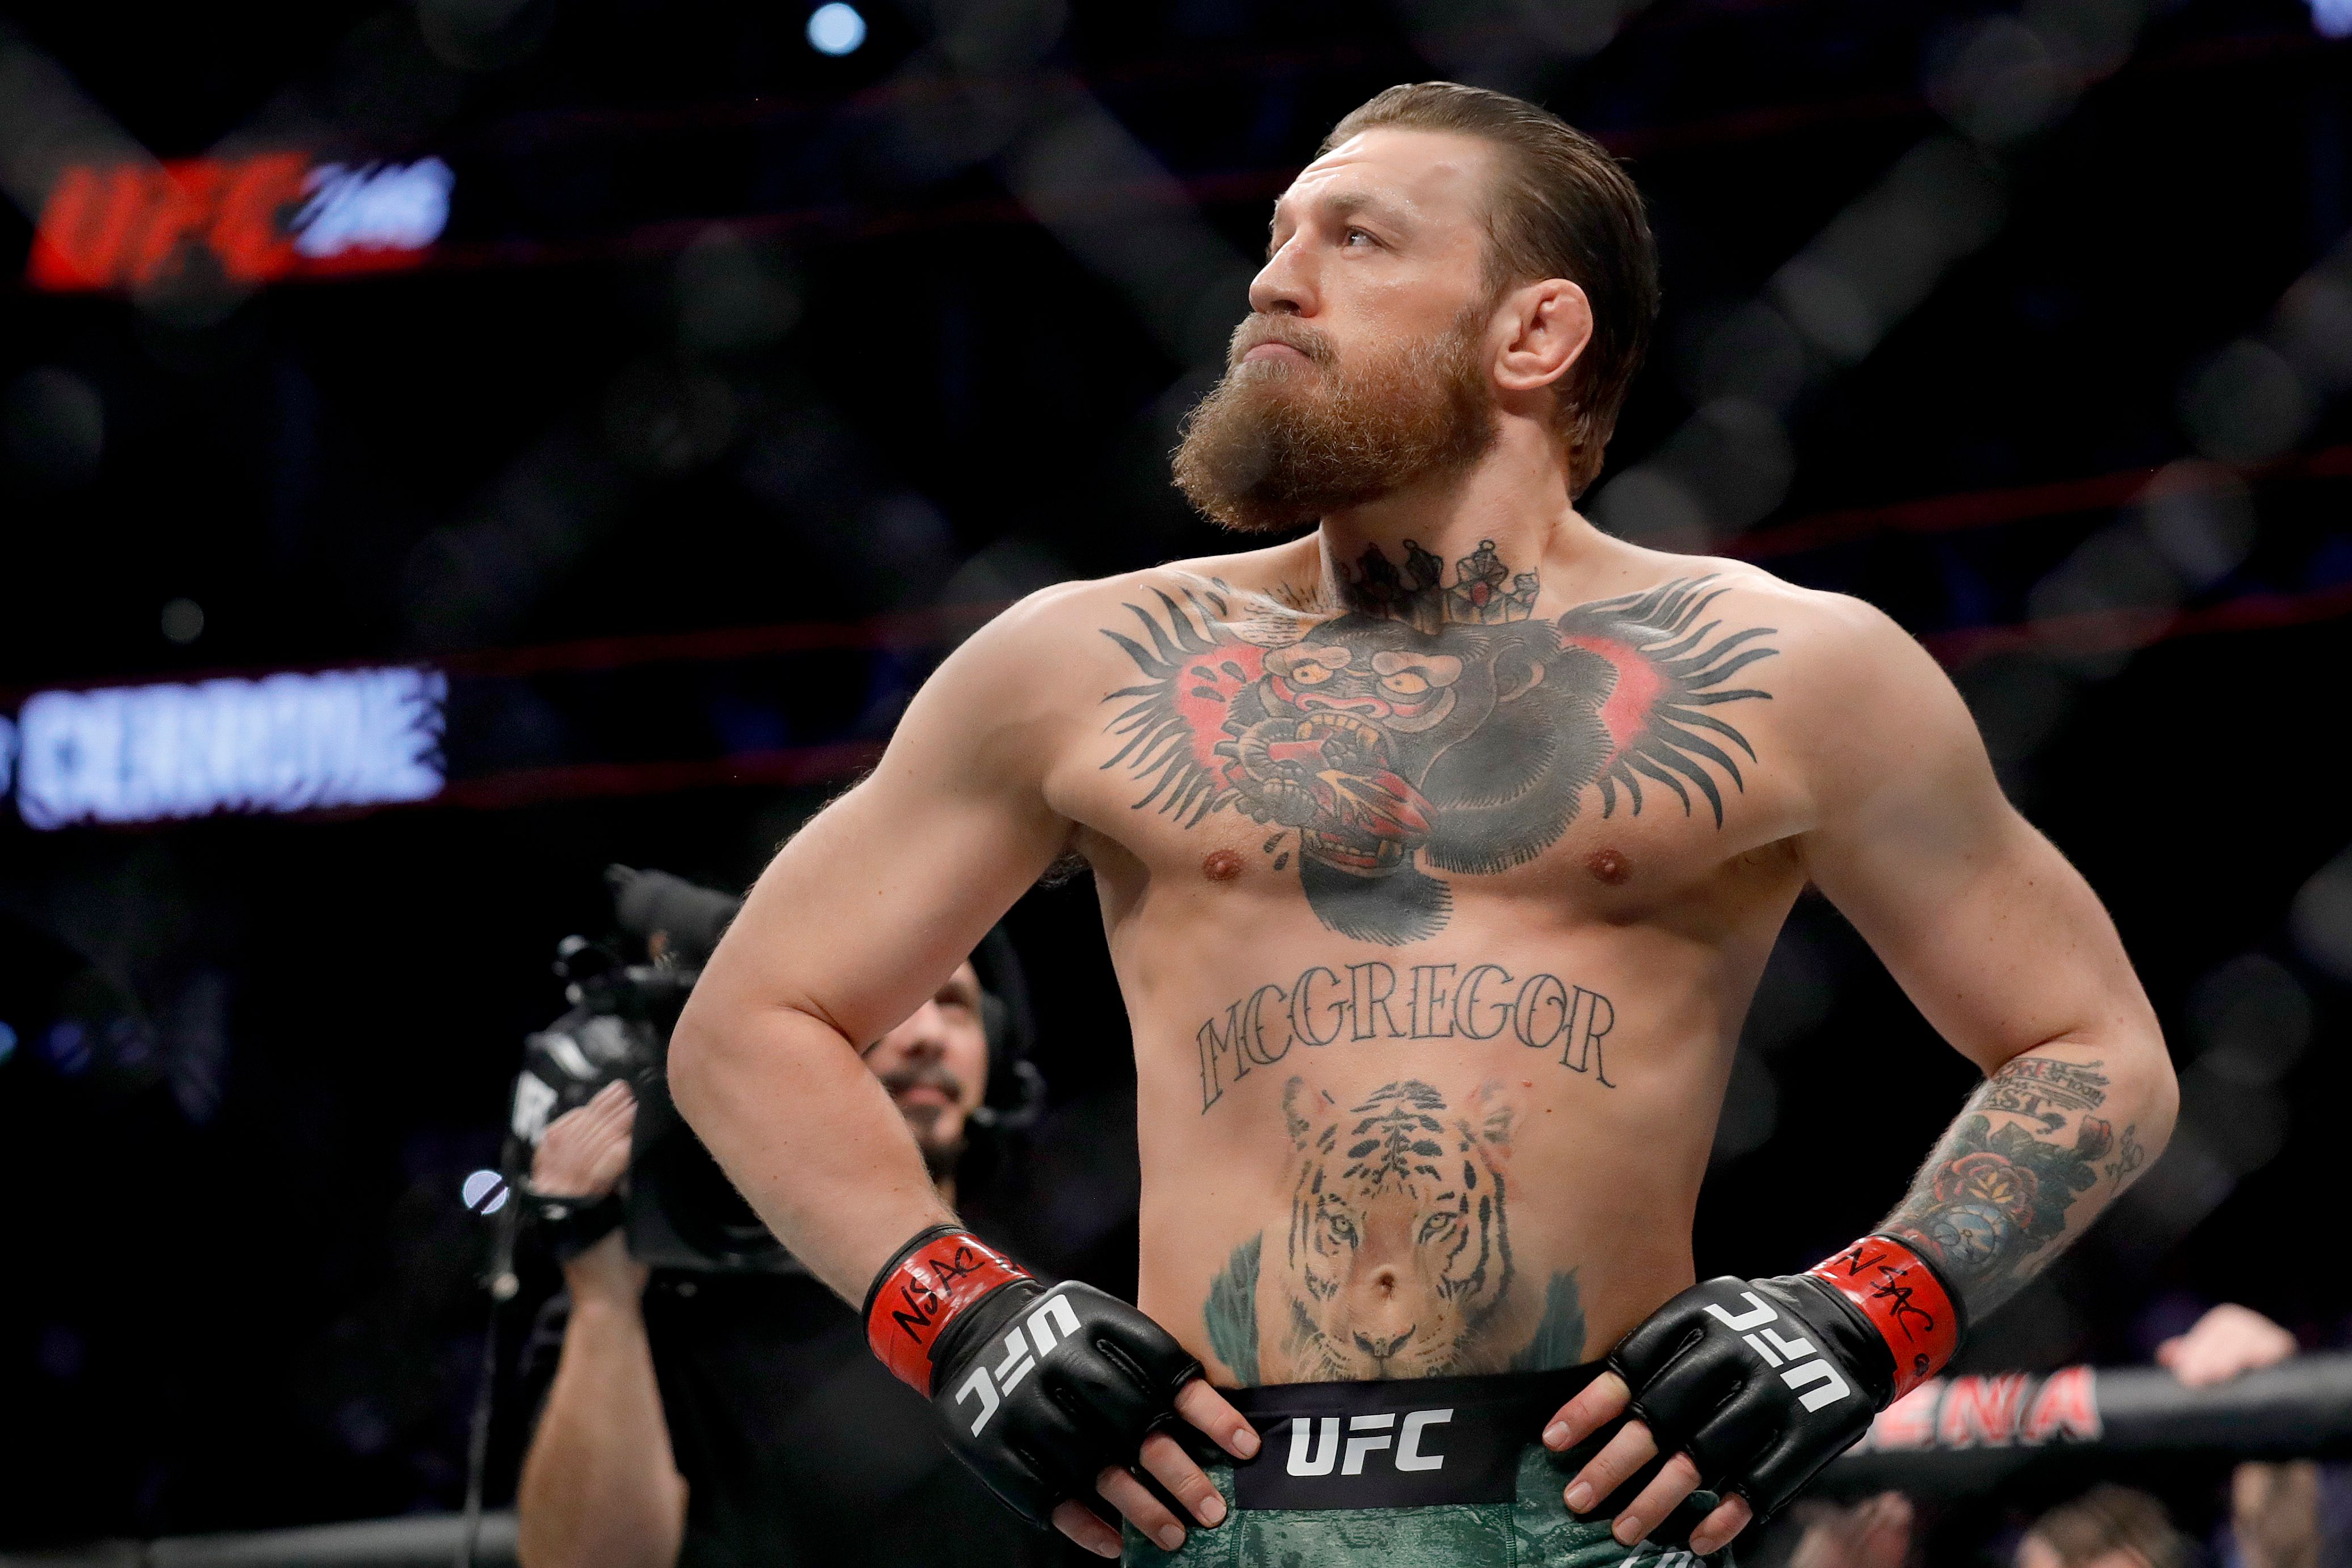 Conor McGregor said he will fight July 10, but it won't be against Dustin Poirier.